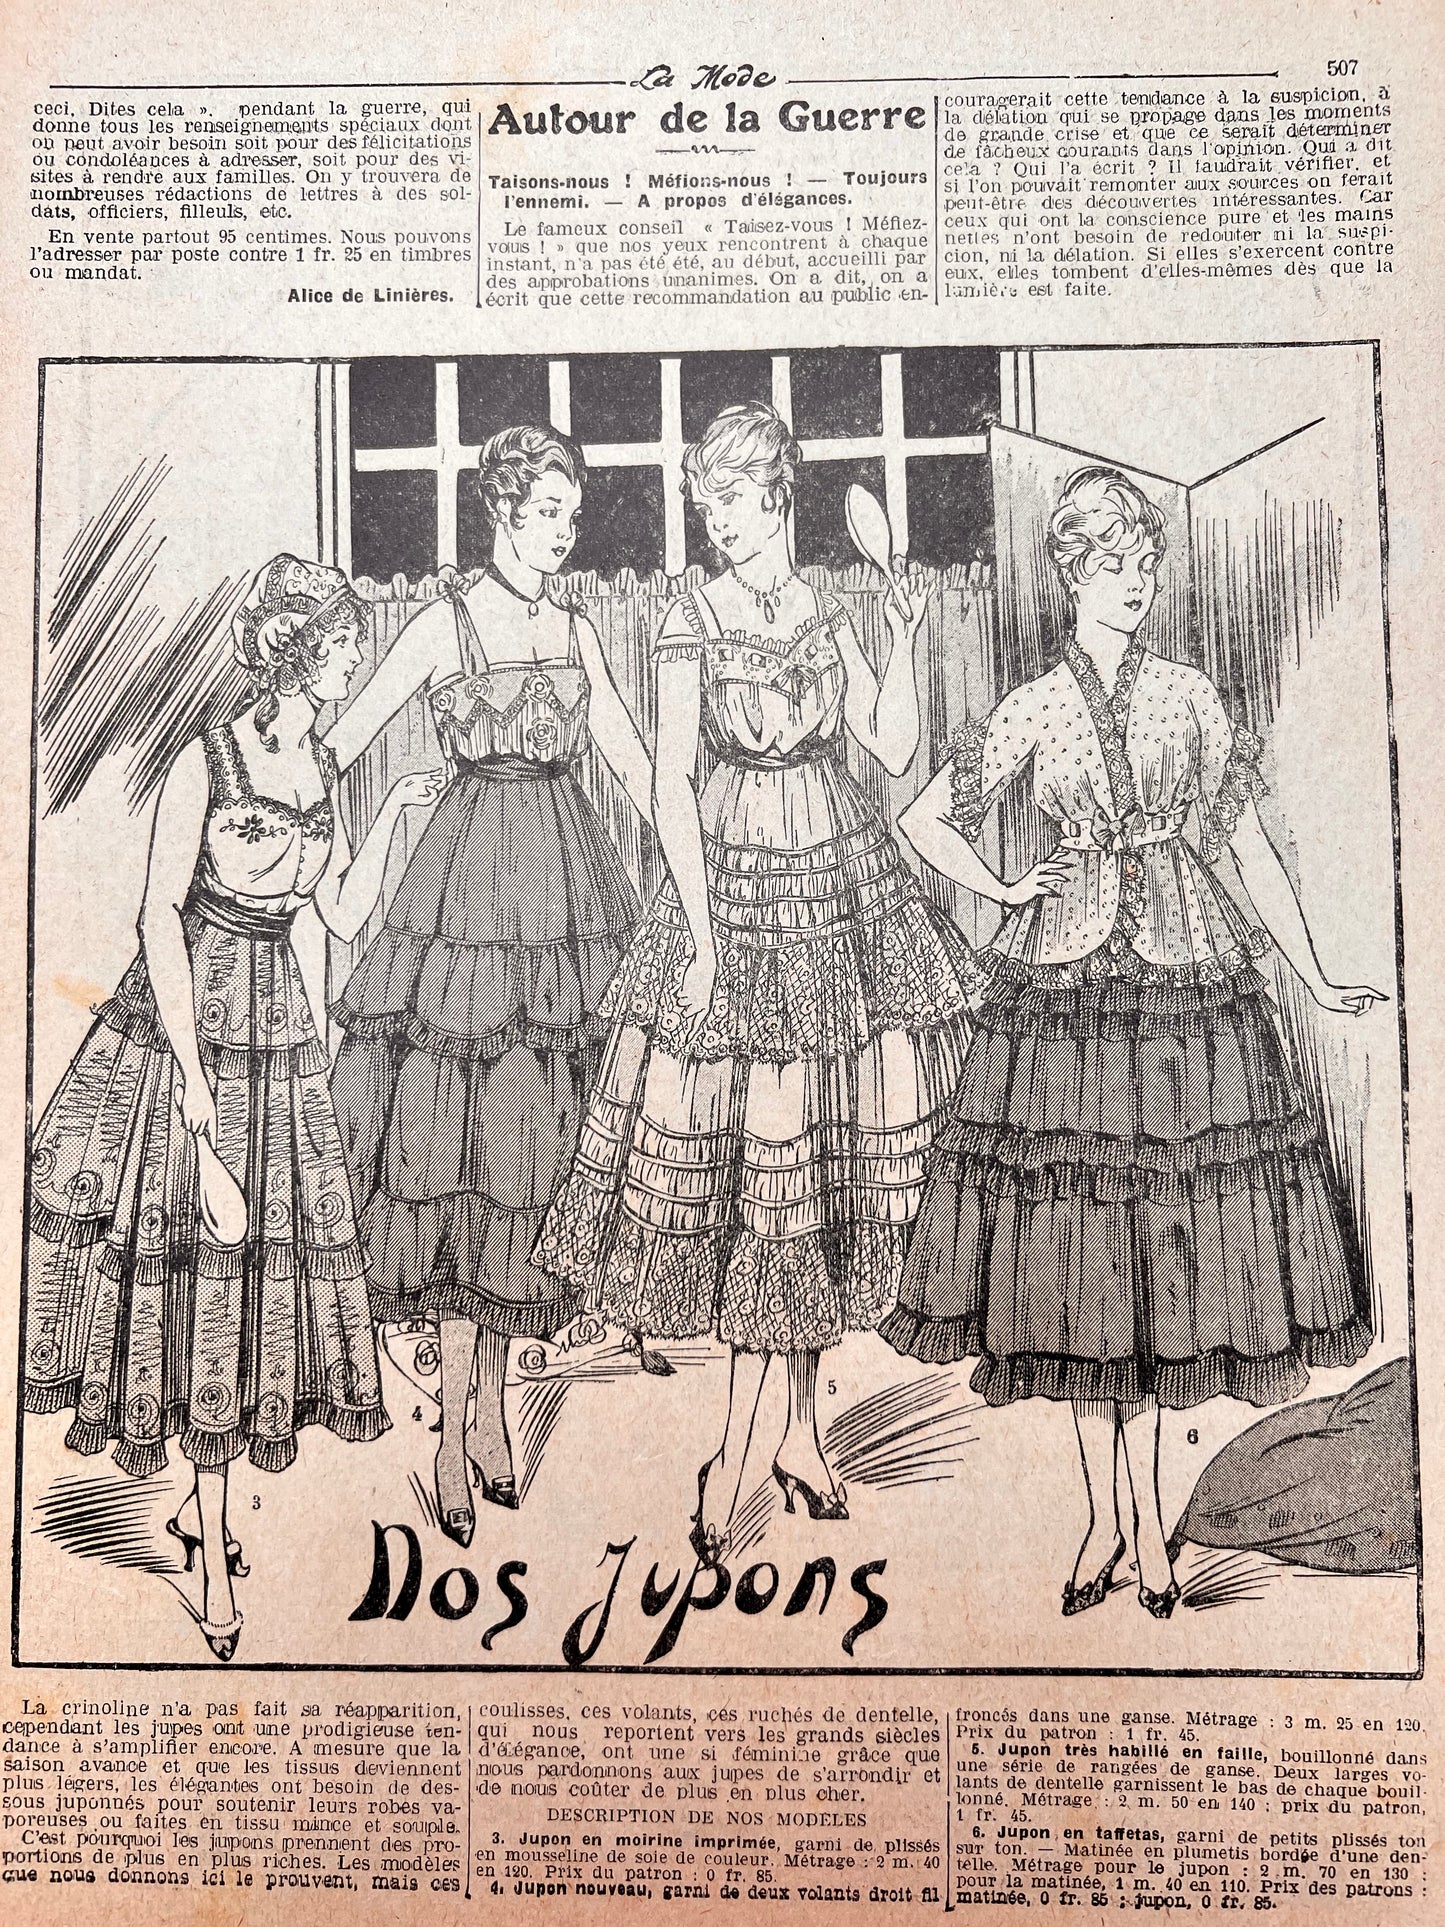 Summer 1916 Fashion and Crafts in May 1916 French Magazine La Mode. Issue No.22